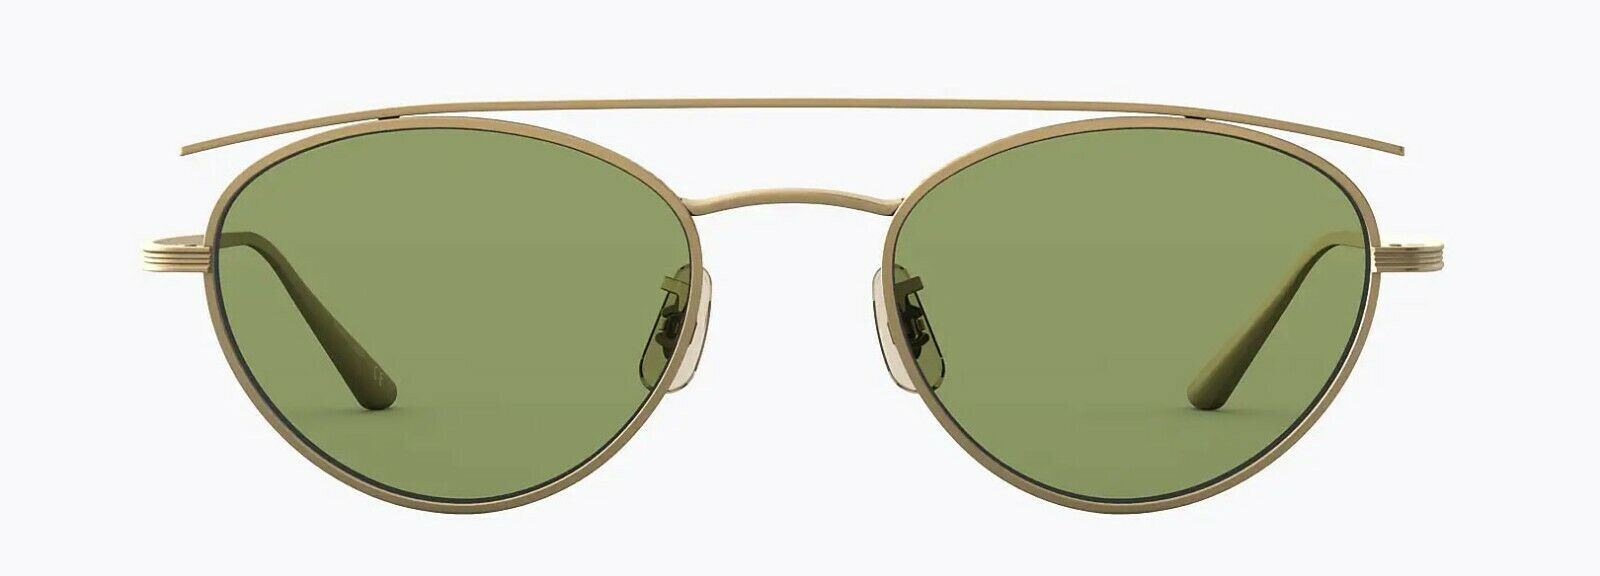 Oliver Peoples Sunglasses 1258ST 528452 The Row Hightree Antique Gold / Green C